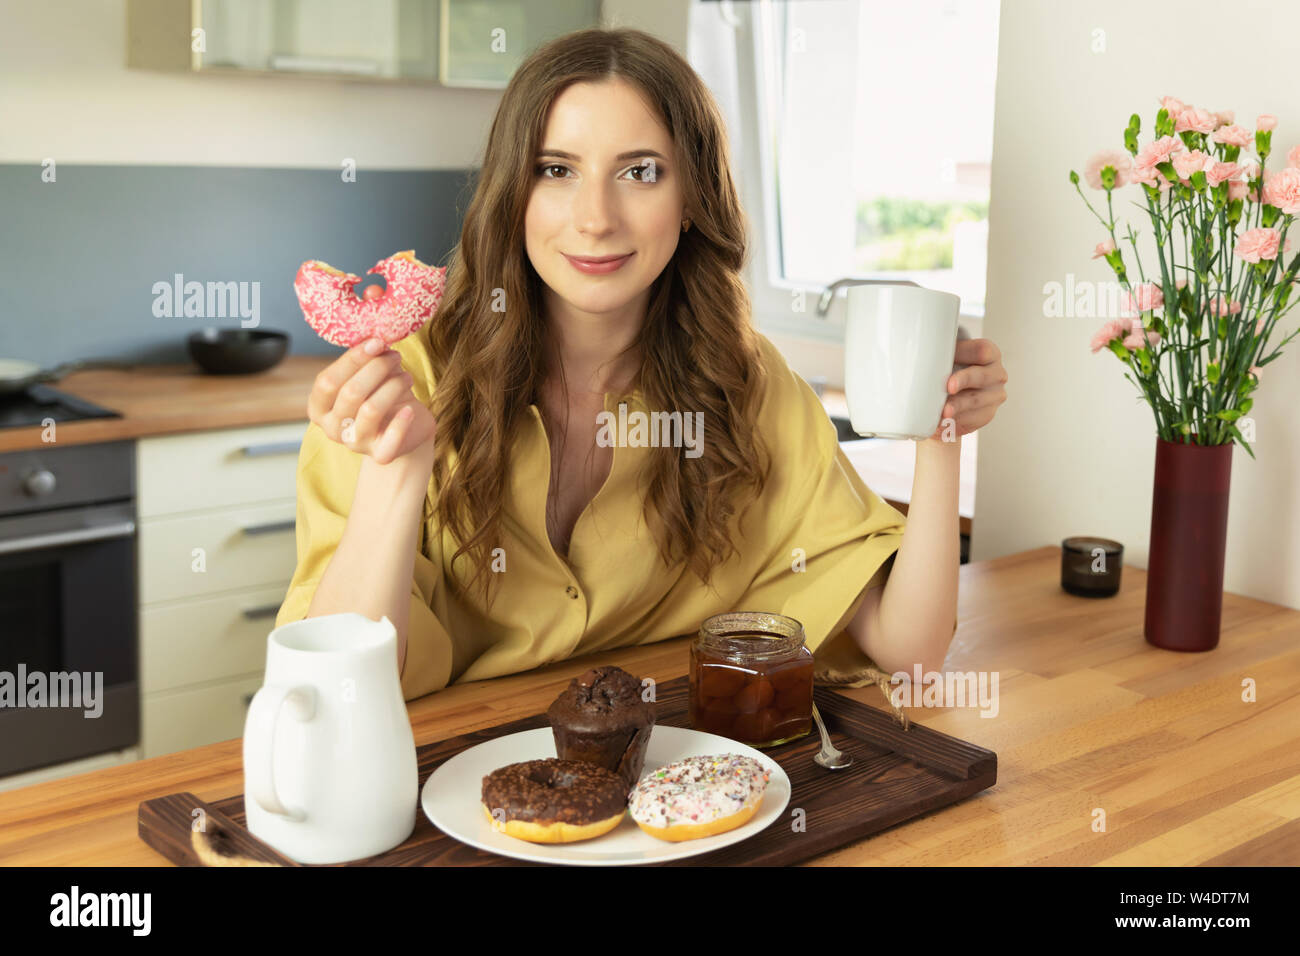 Young beautiful girl is having breakfast at home in the kitchen. She drinks her morning coffee and with great pleasure eats a donut with pink icing. Stock Photo